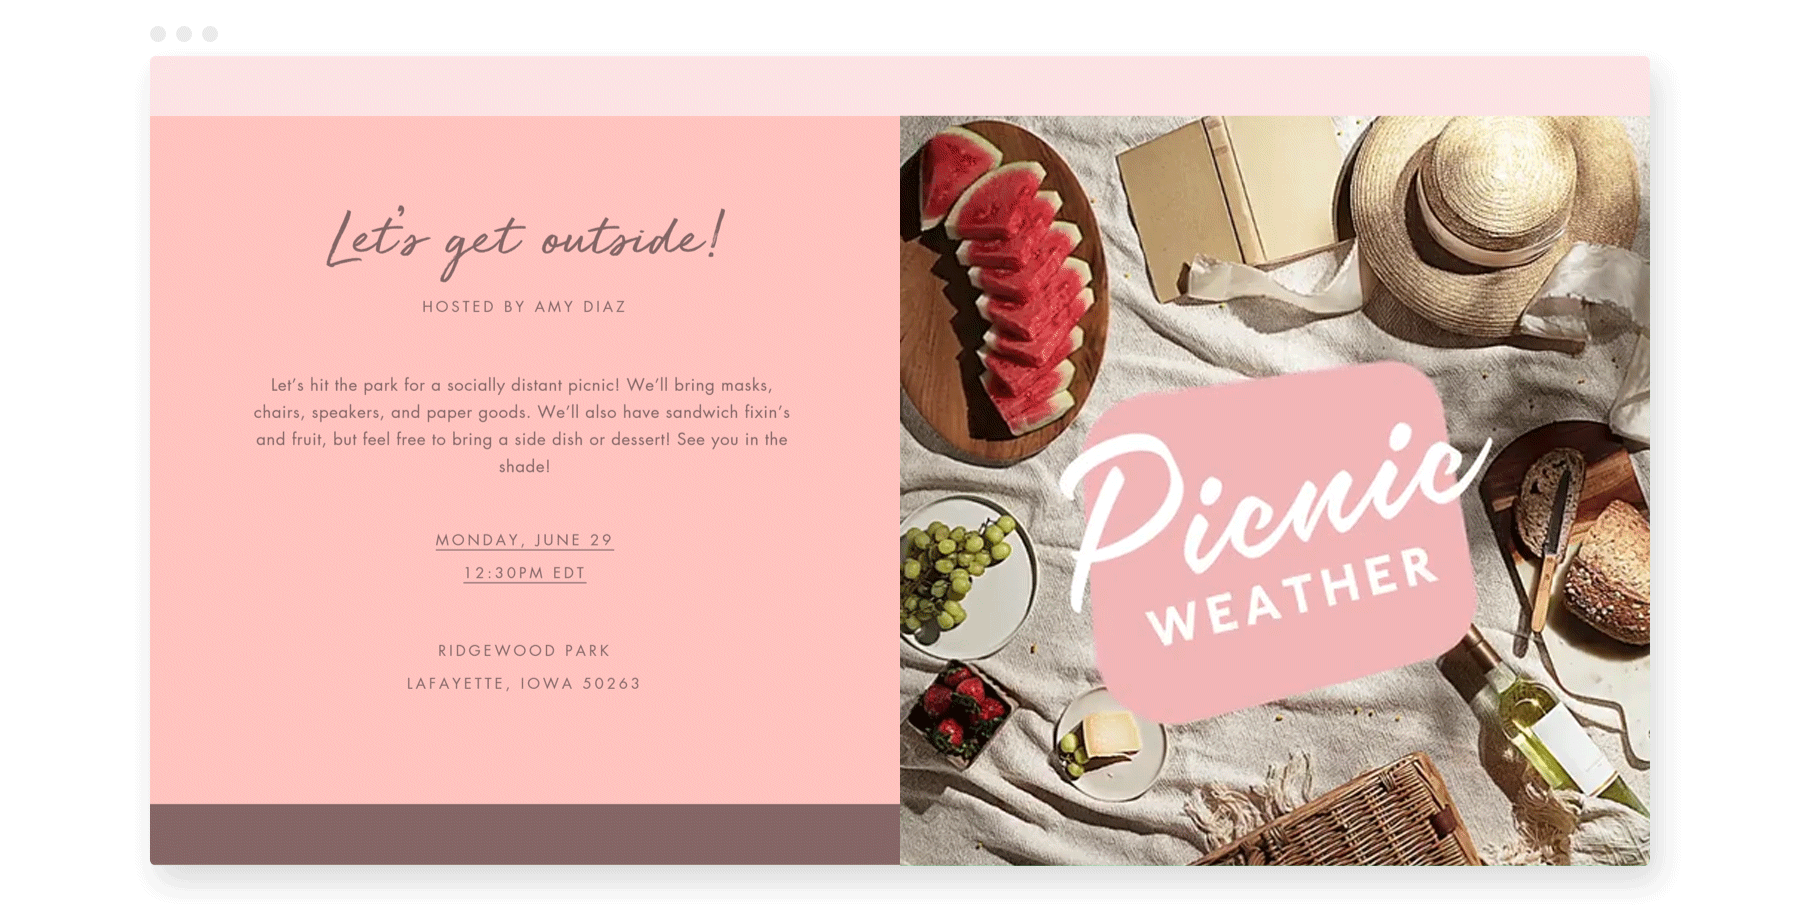 “Picnic Weather” Flyer by Paperless Post